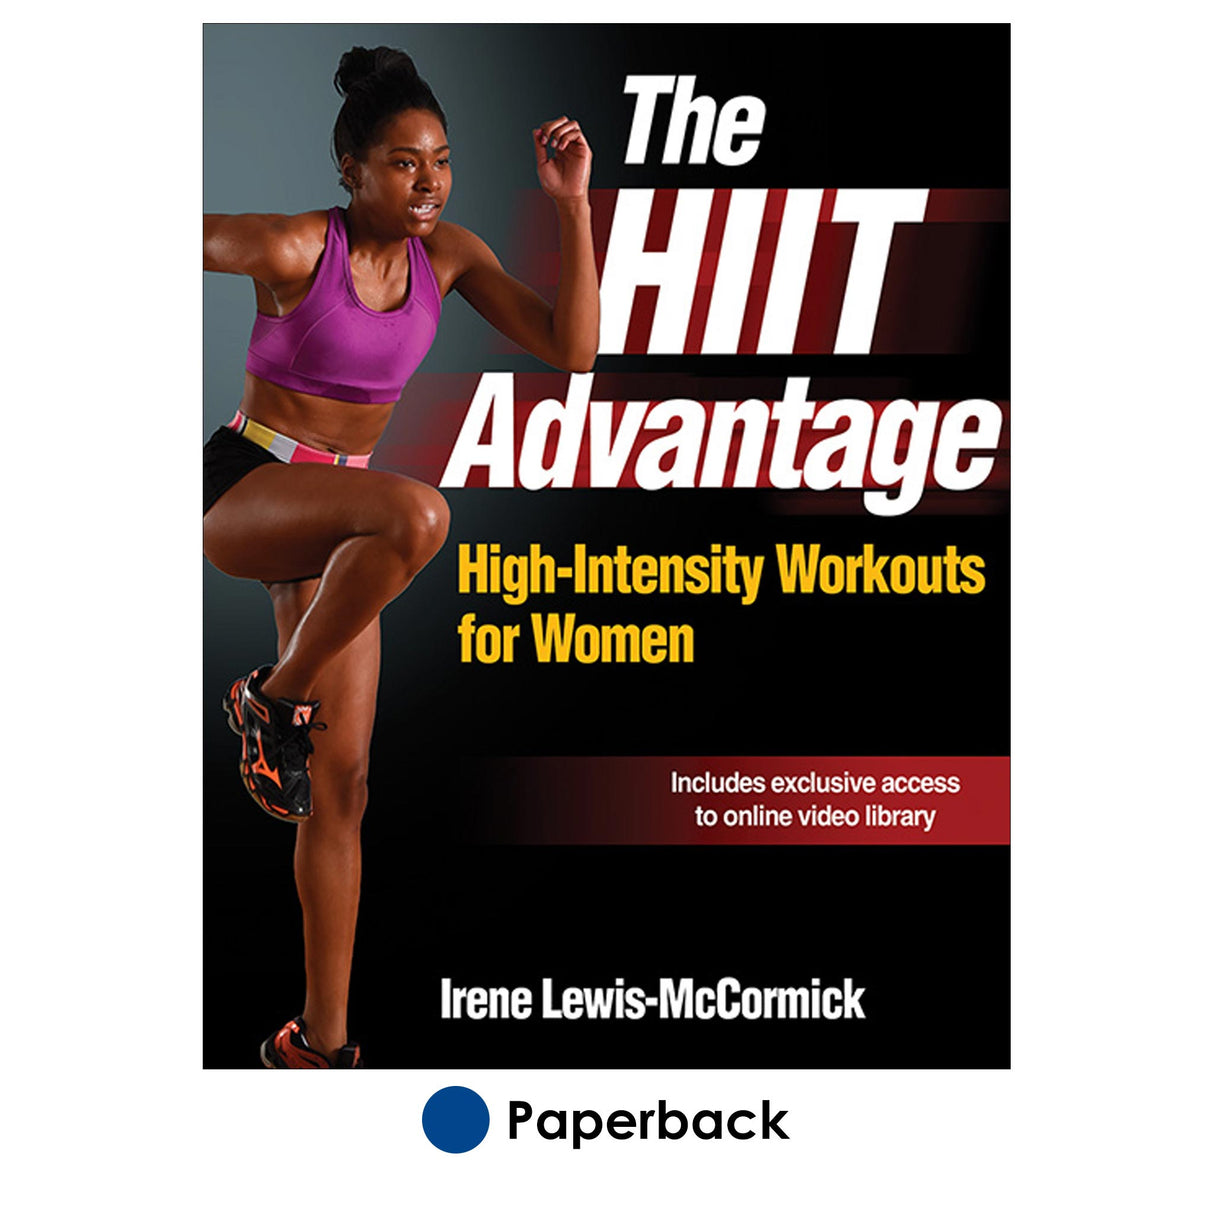 HIIT Advantage With HKPropel Online Video, The